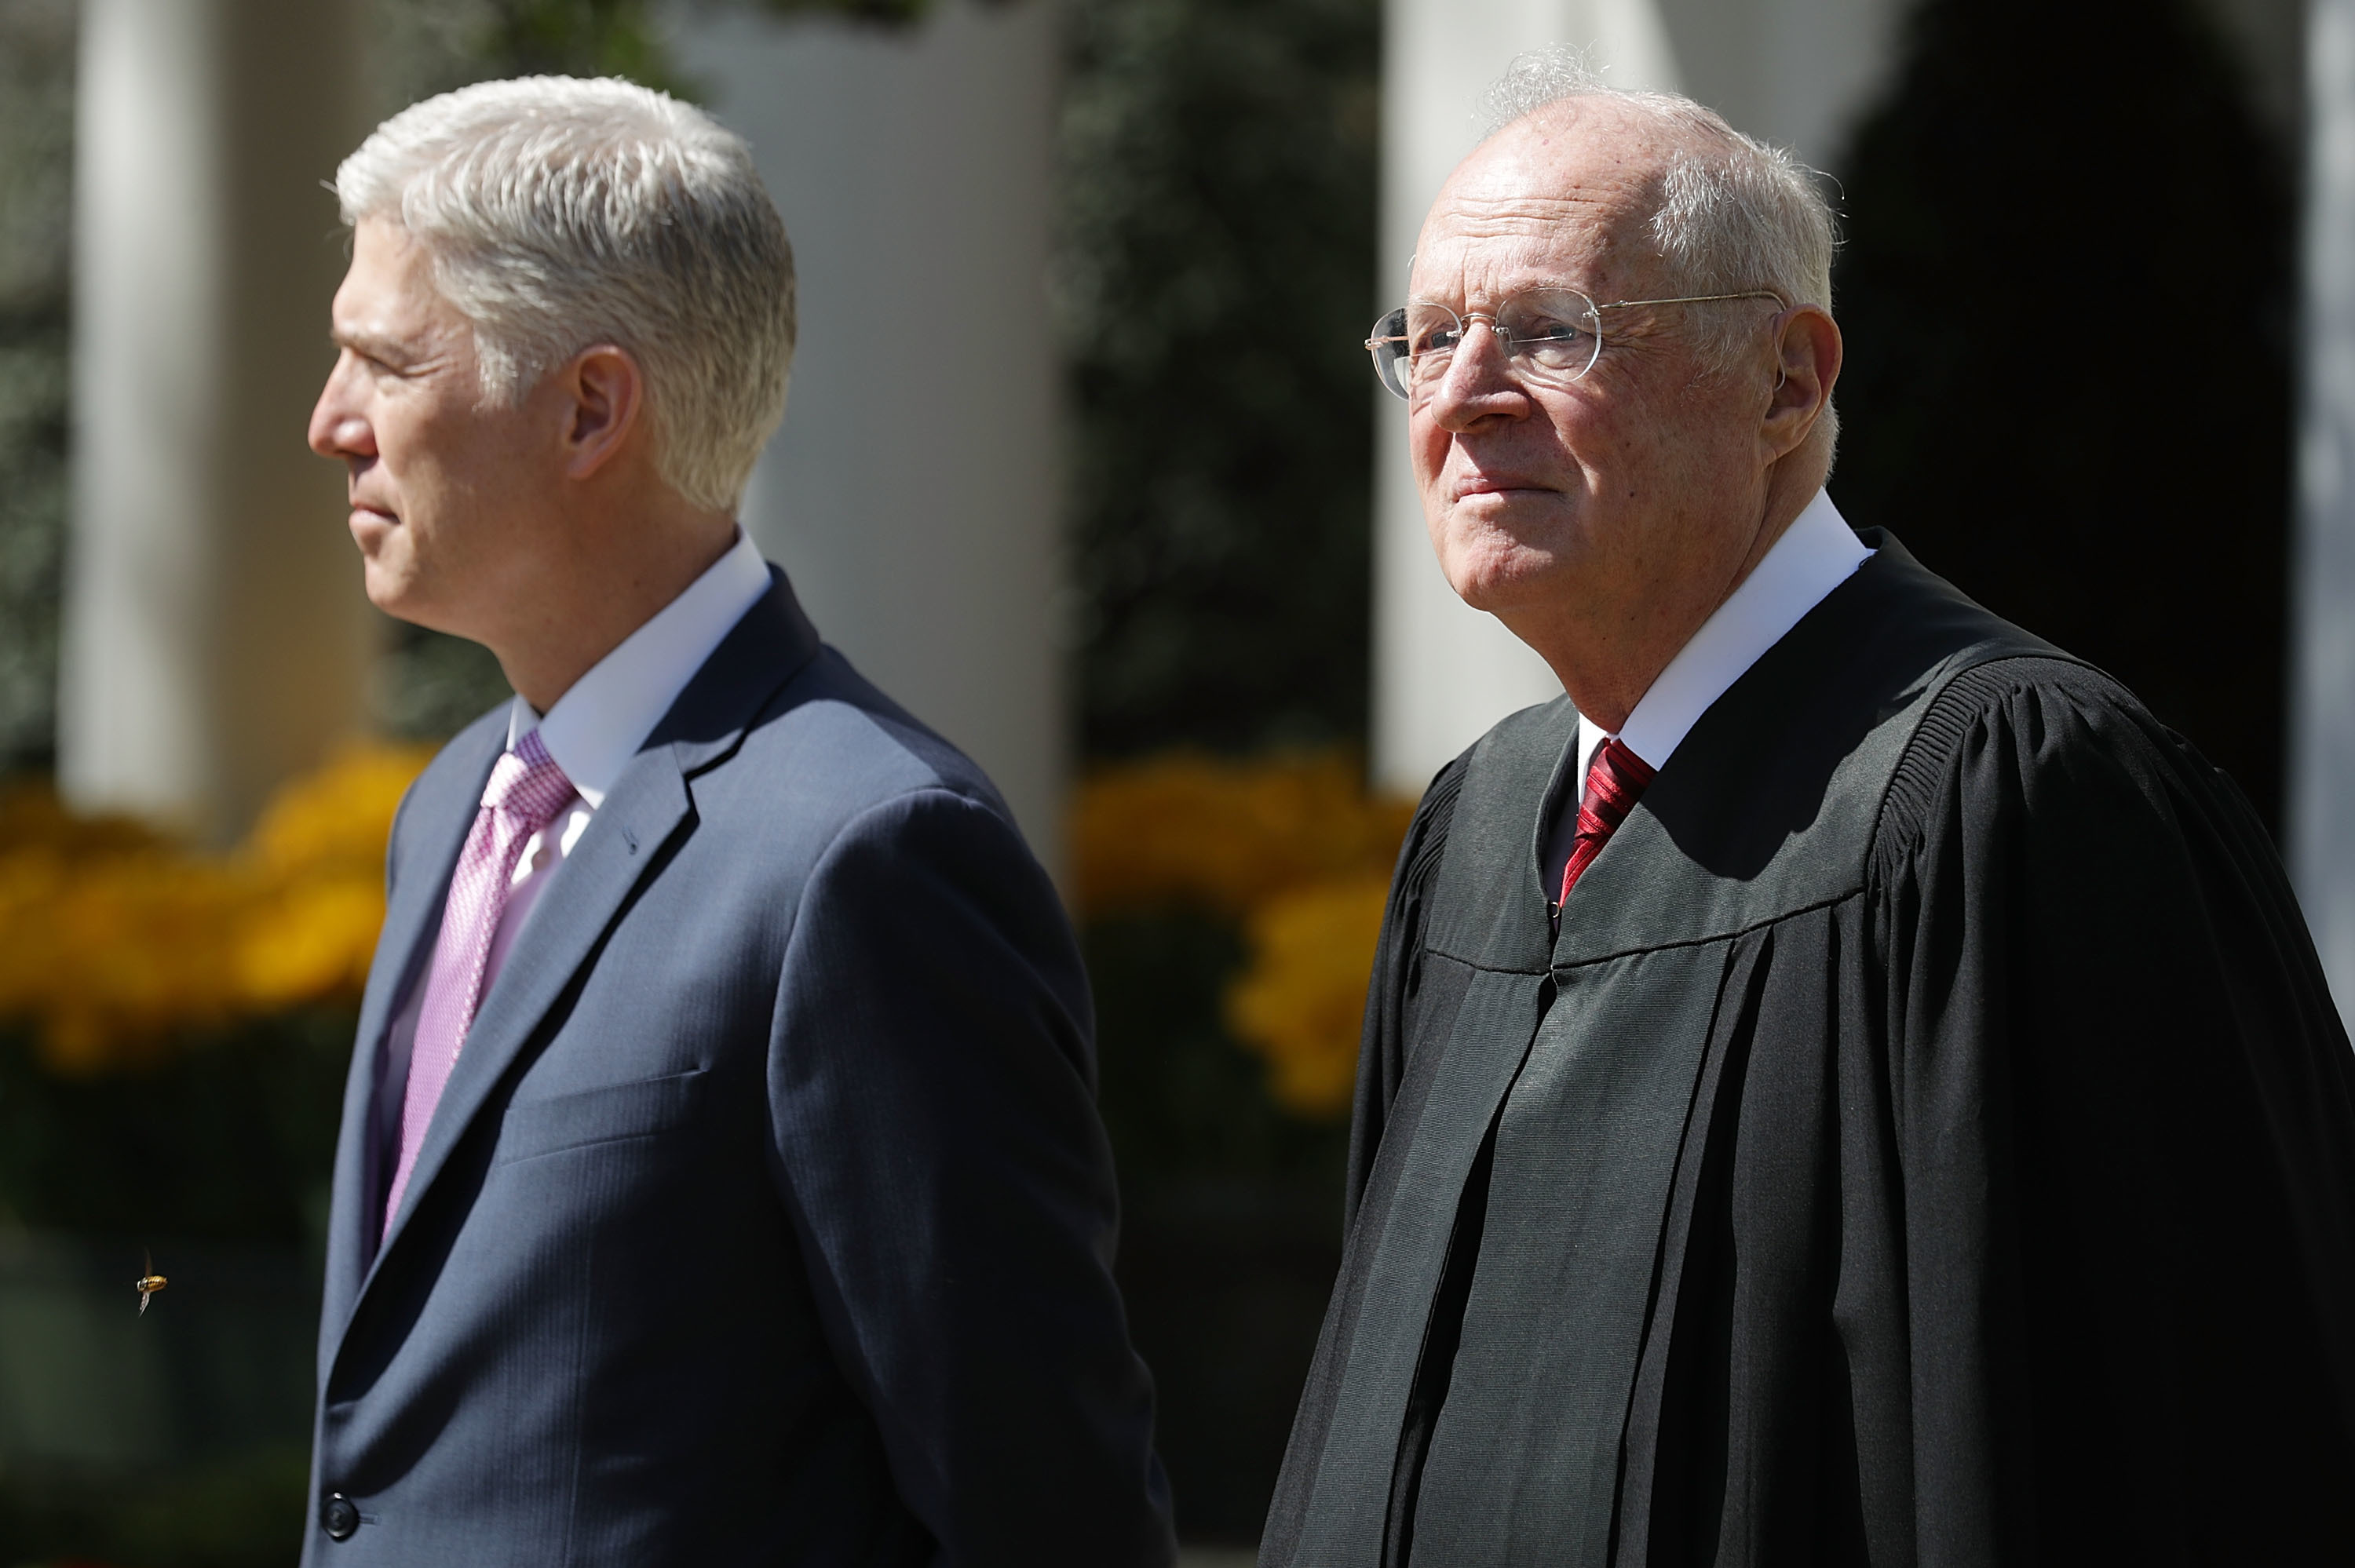 Supreme Court Associate Justice Anthony Kennedy, right, prepares to administer the judicial oath to Judge Neil Gorsuch during a ceremony in the Rose Garden at the White House in 2017. (Photo by Chip Somodevilla/Getty Images)